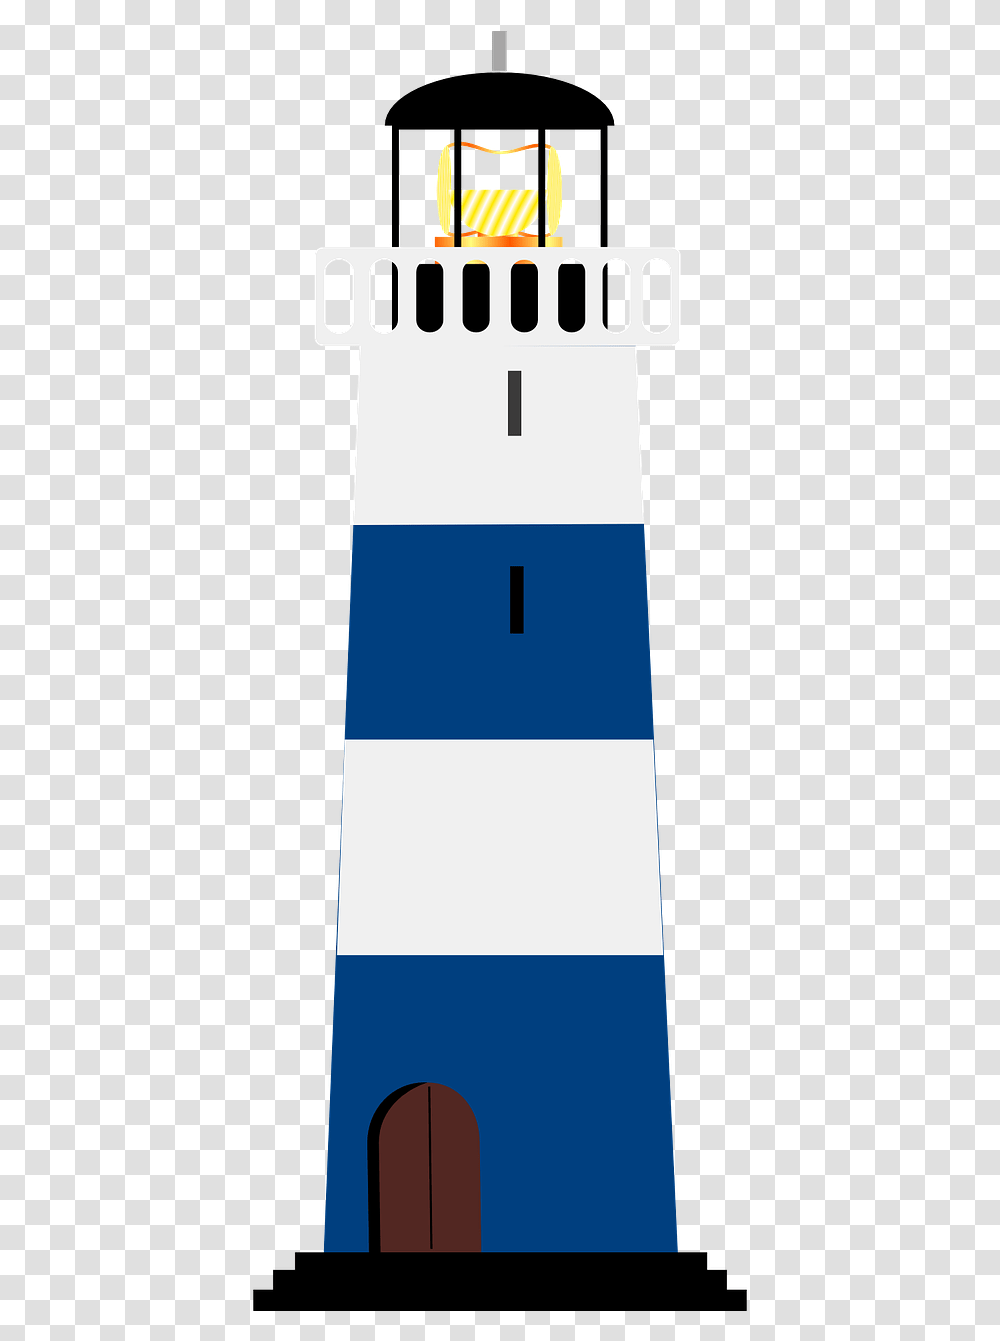 Lighthouse Blue White Free Vector Graphic On Pixabay Lighthouse Clip Art, Architecture, Building, Symbol, Electronics Transparent Png